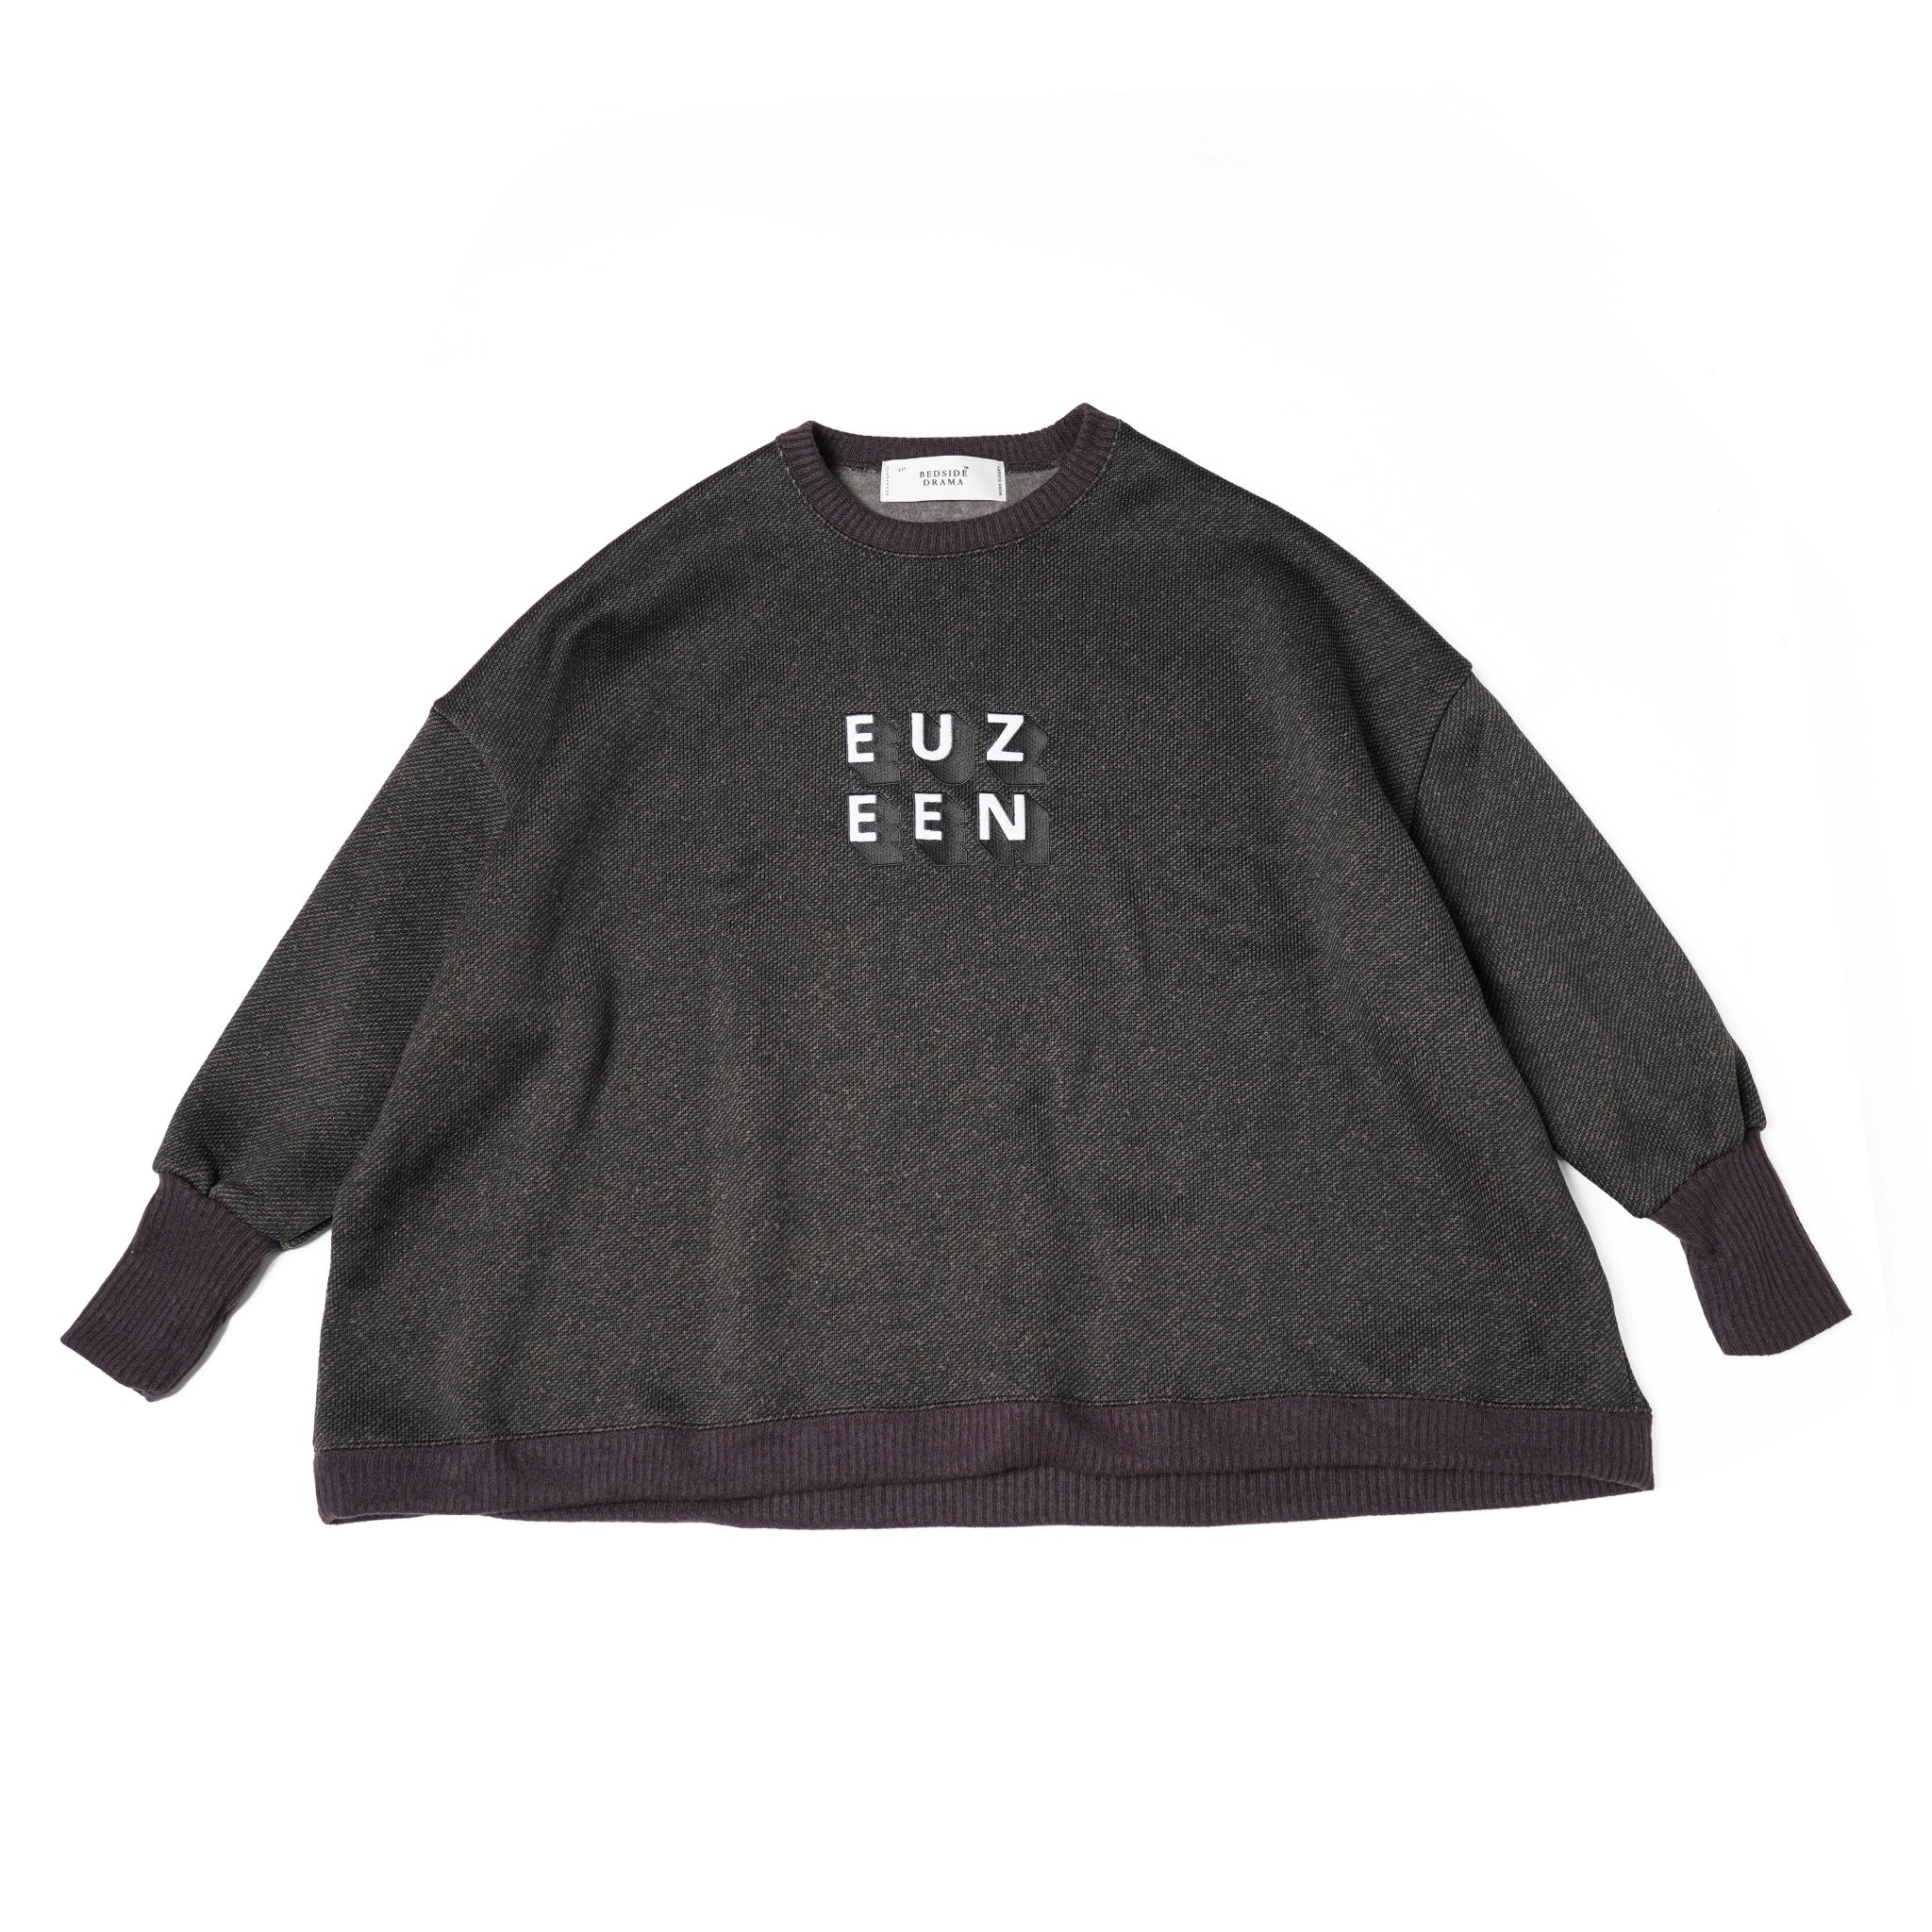 No:bsd23AW-28Ca | Name:Home Sweater Pullover/EUZEEN | Color:Brown